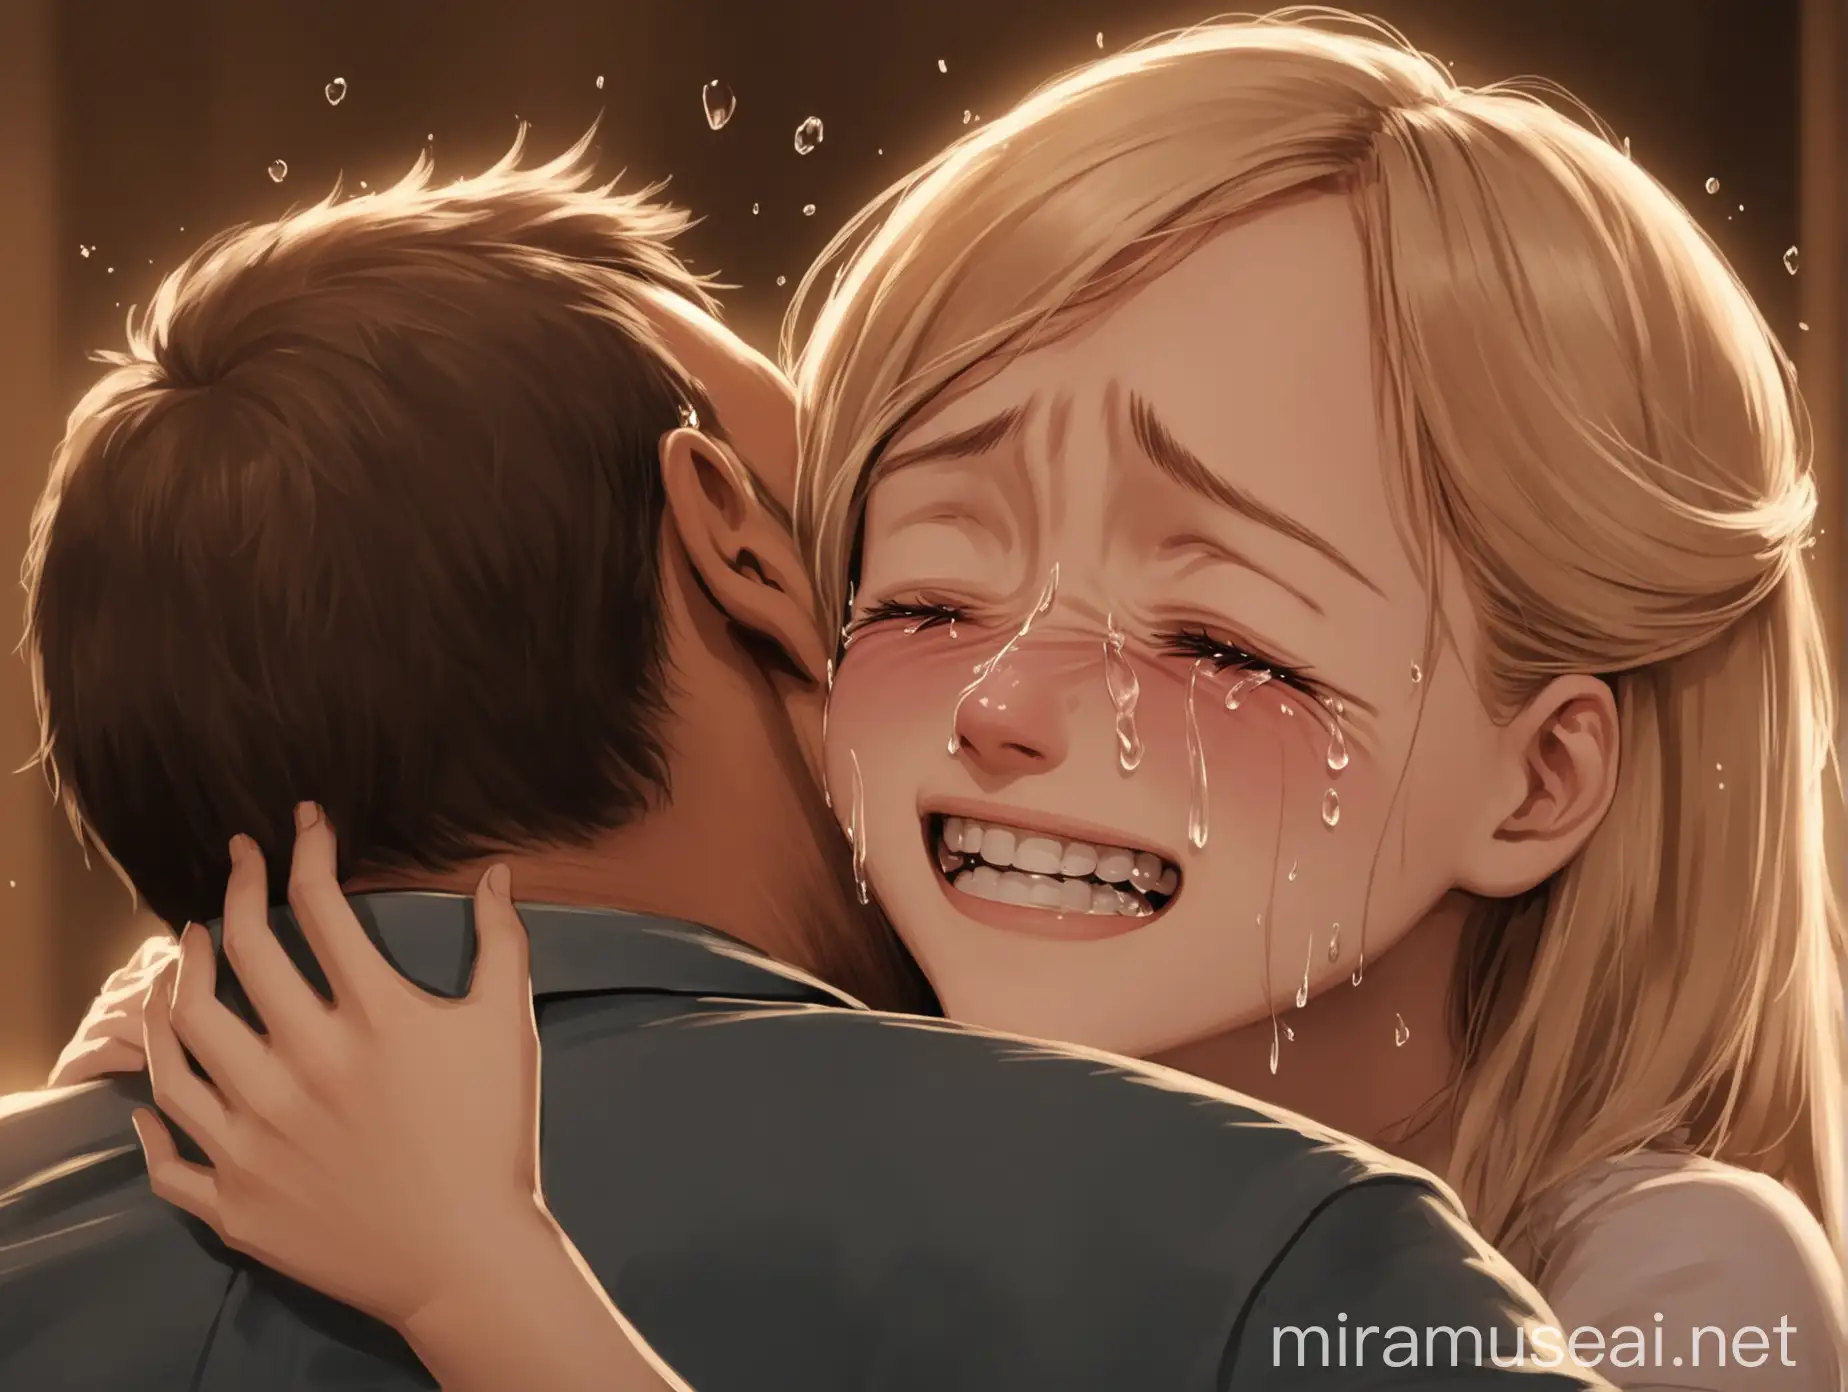 Emotional Moment Girl Crying Hugs Someone Man Laughs with Tears